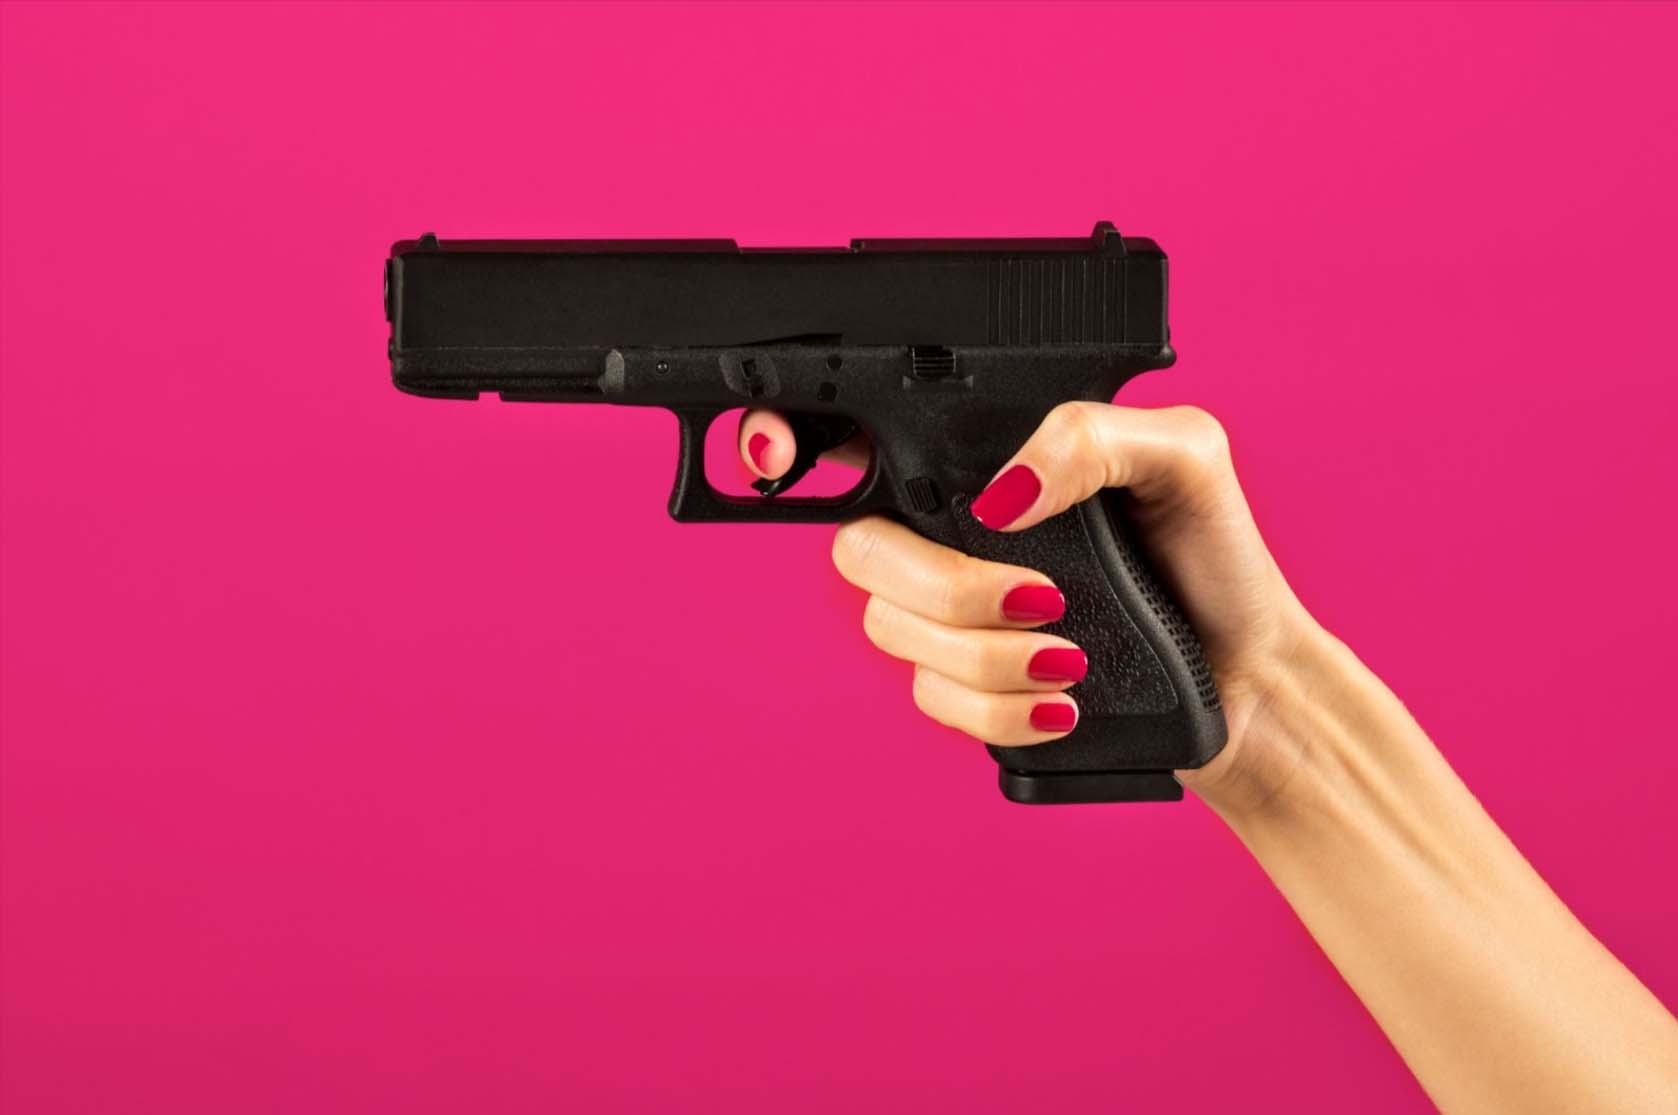 Close-up of a woman's hand with red nail polish gripping a pistol, set against a vibrant pink background.